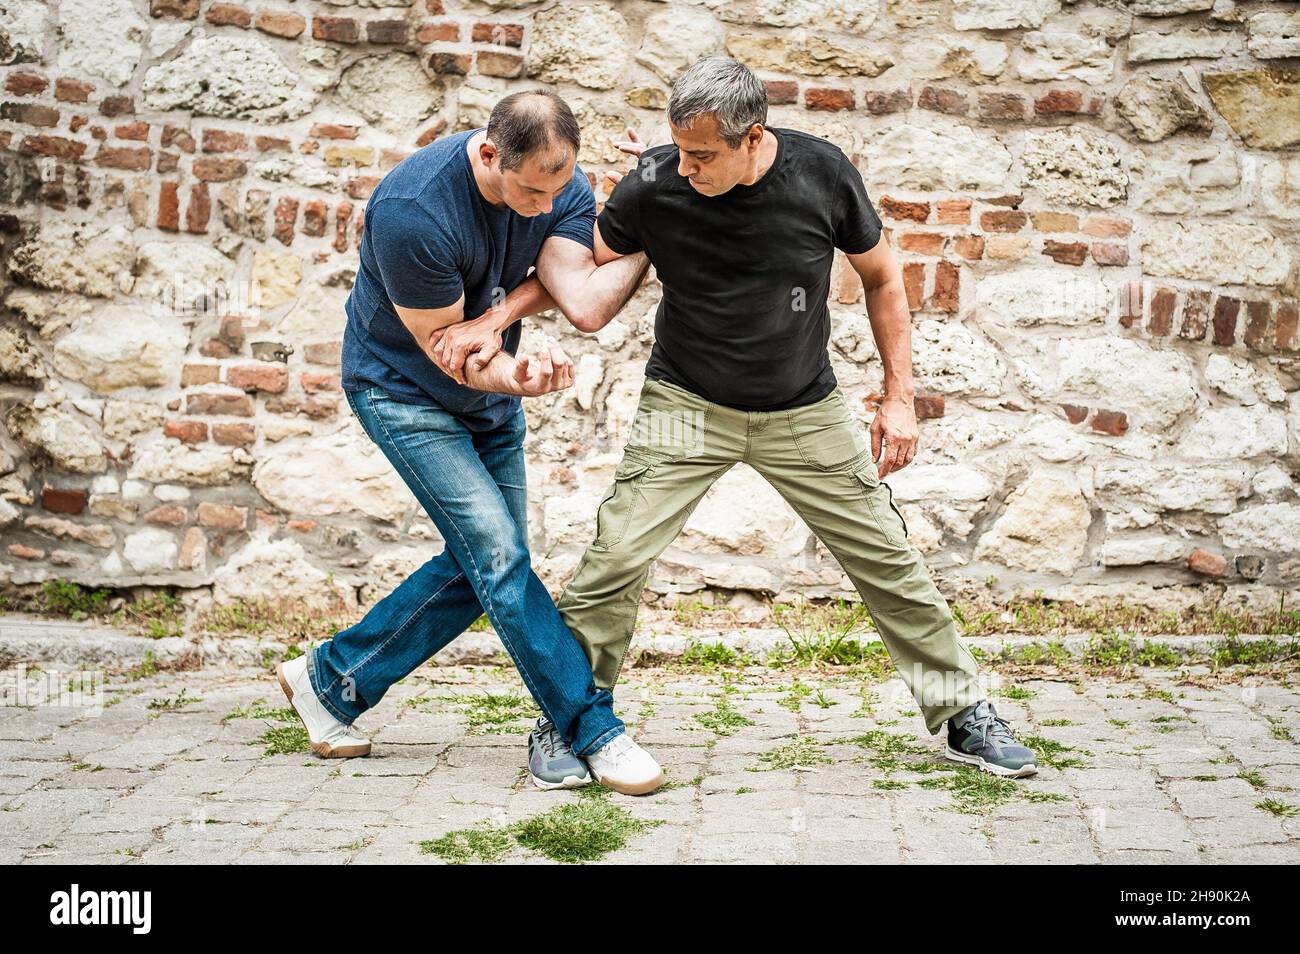 Self Defence or Self Defense Techniques in a Fight Stock Photo - Alamy